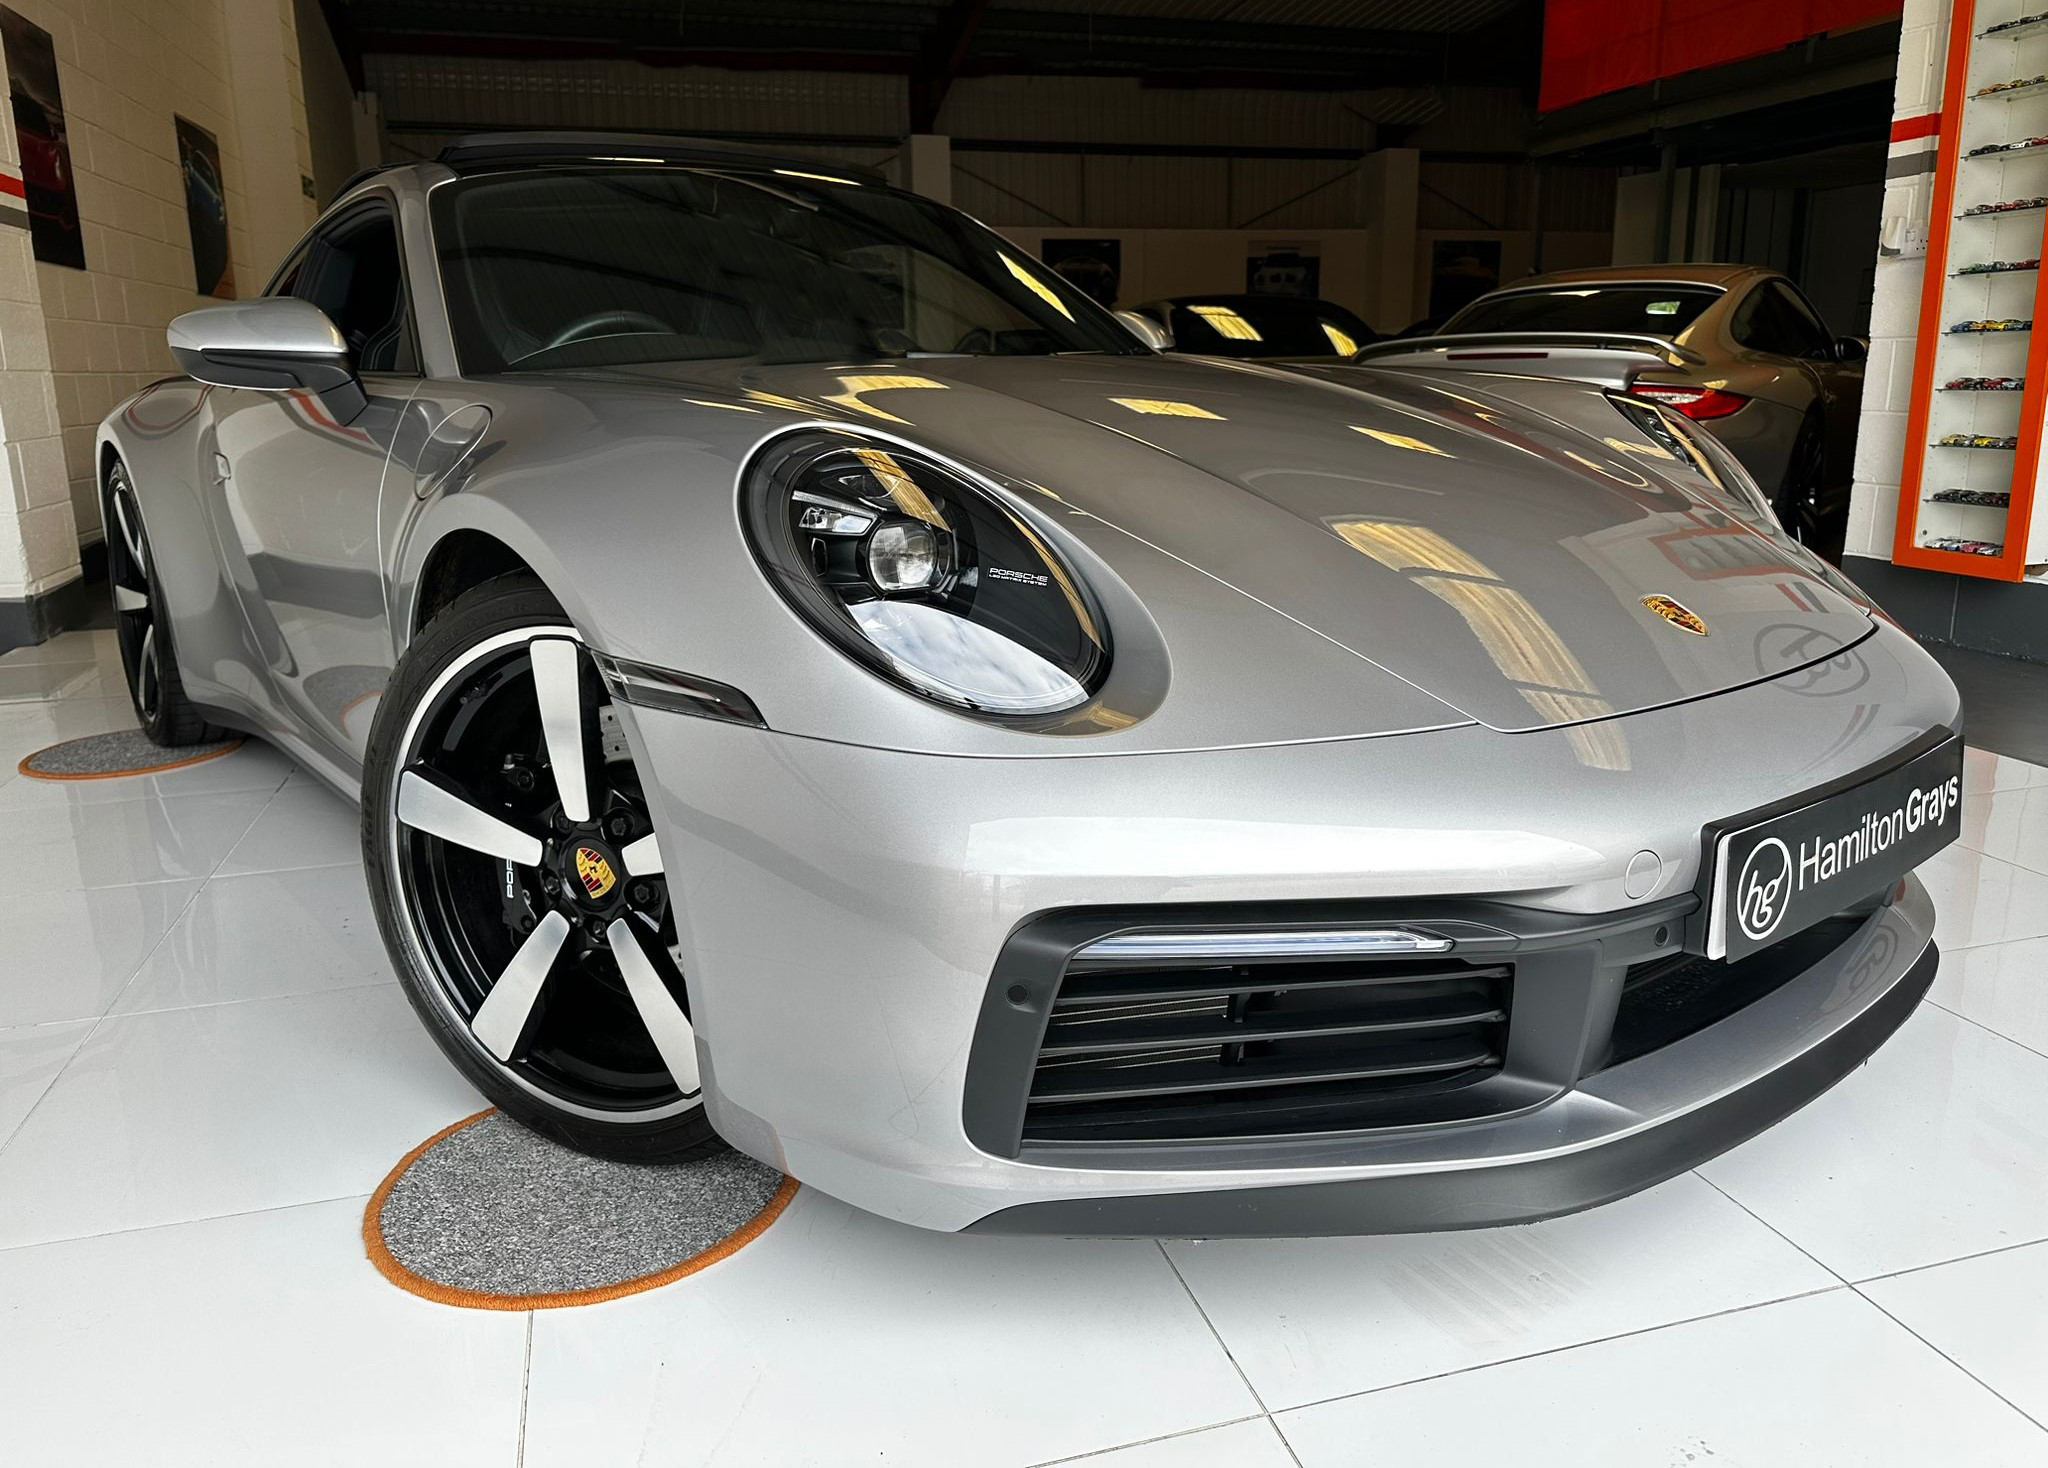 2021 (21) Porsche 911 3.0T [992] Carrera 4S PDK 4WD. In GT Silver Metallic with Extended Black Hide. 4,569m. FPSH. 12m Warranty.. Comes with over 20 Factory Fitted Optional Extras.  £117,950